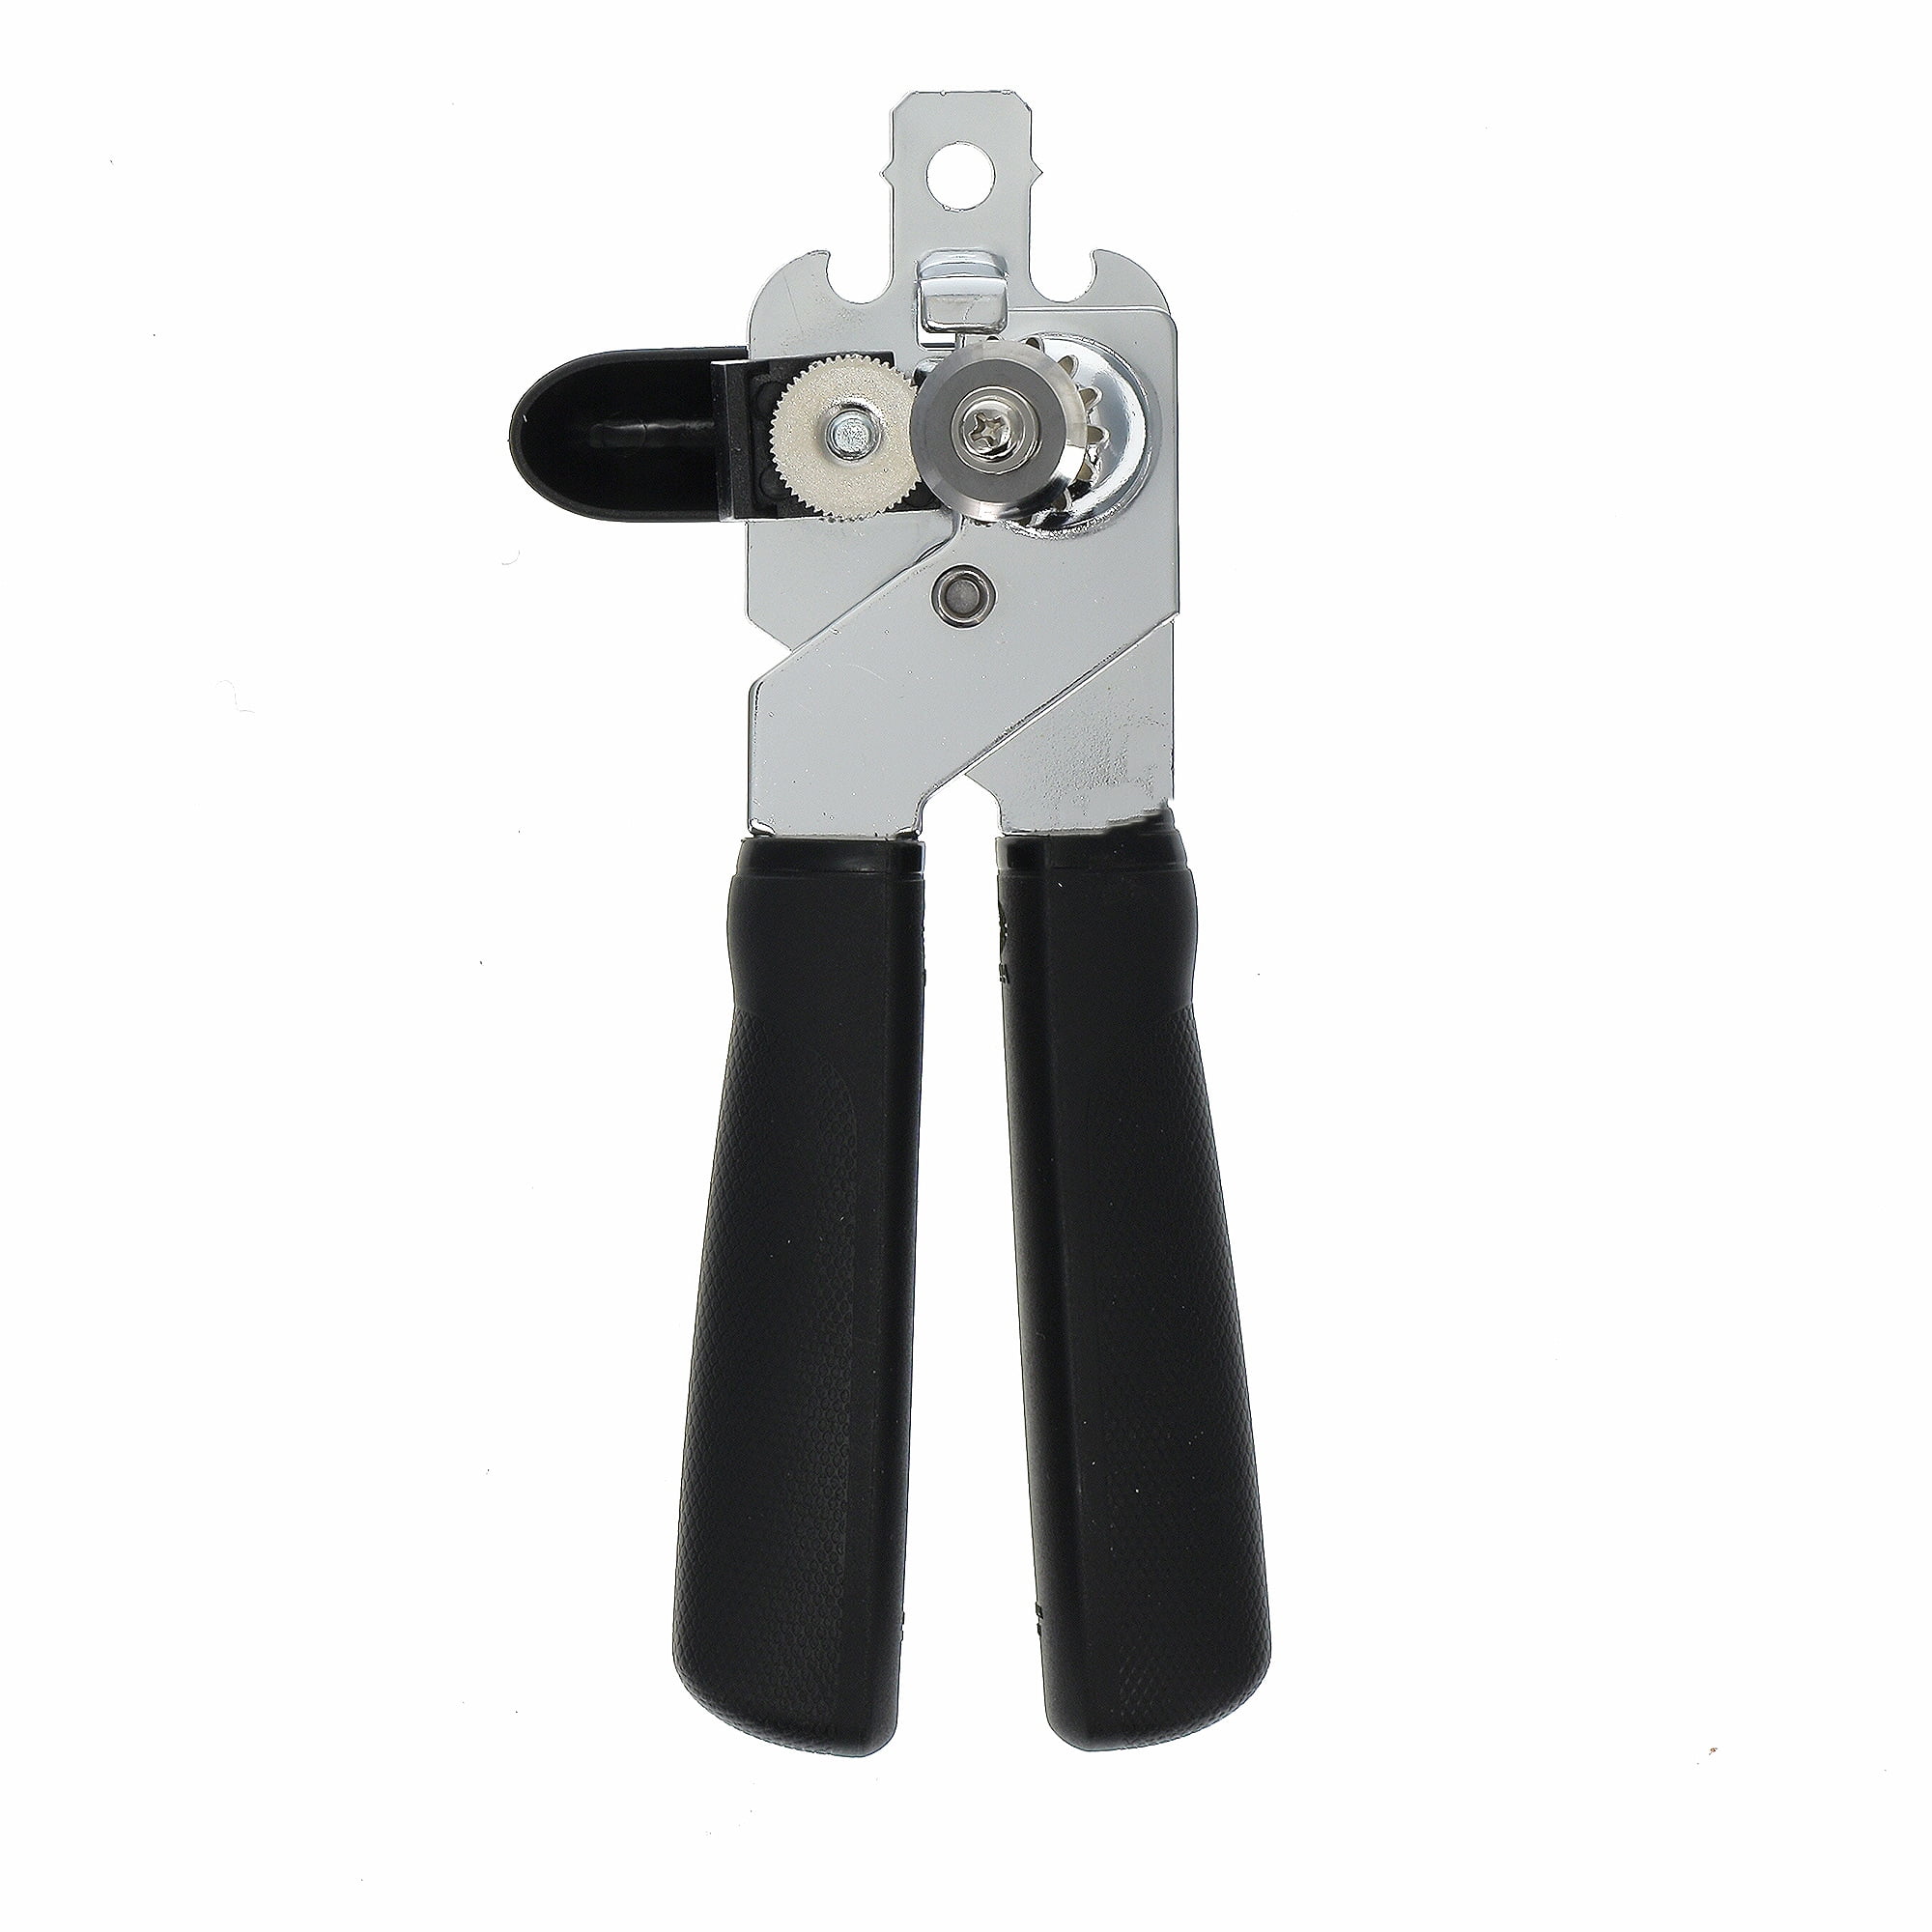 Gangy Stainless-Steel Can Opener (110x75mm)